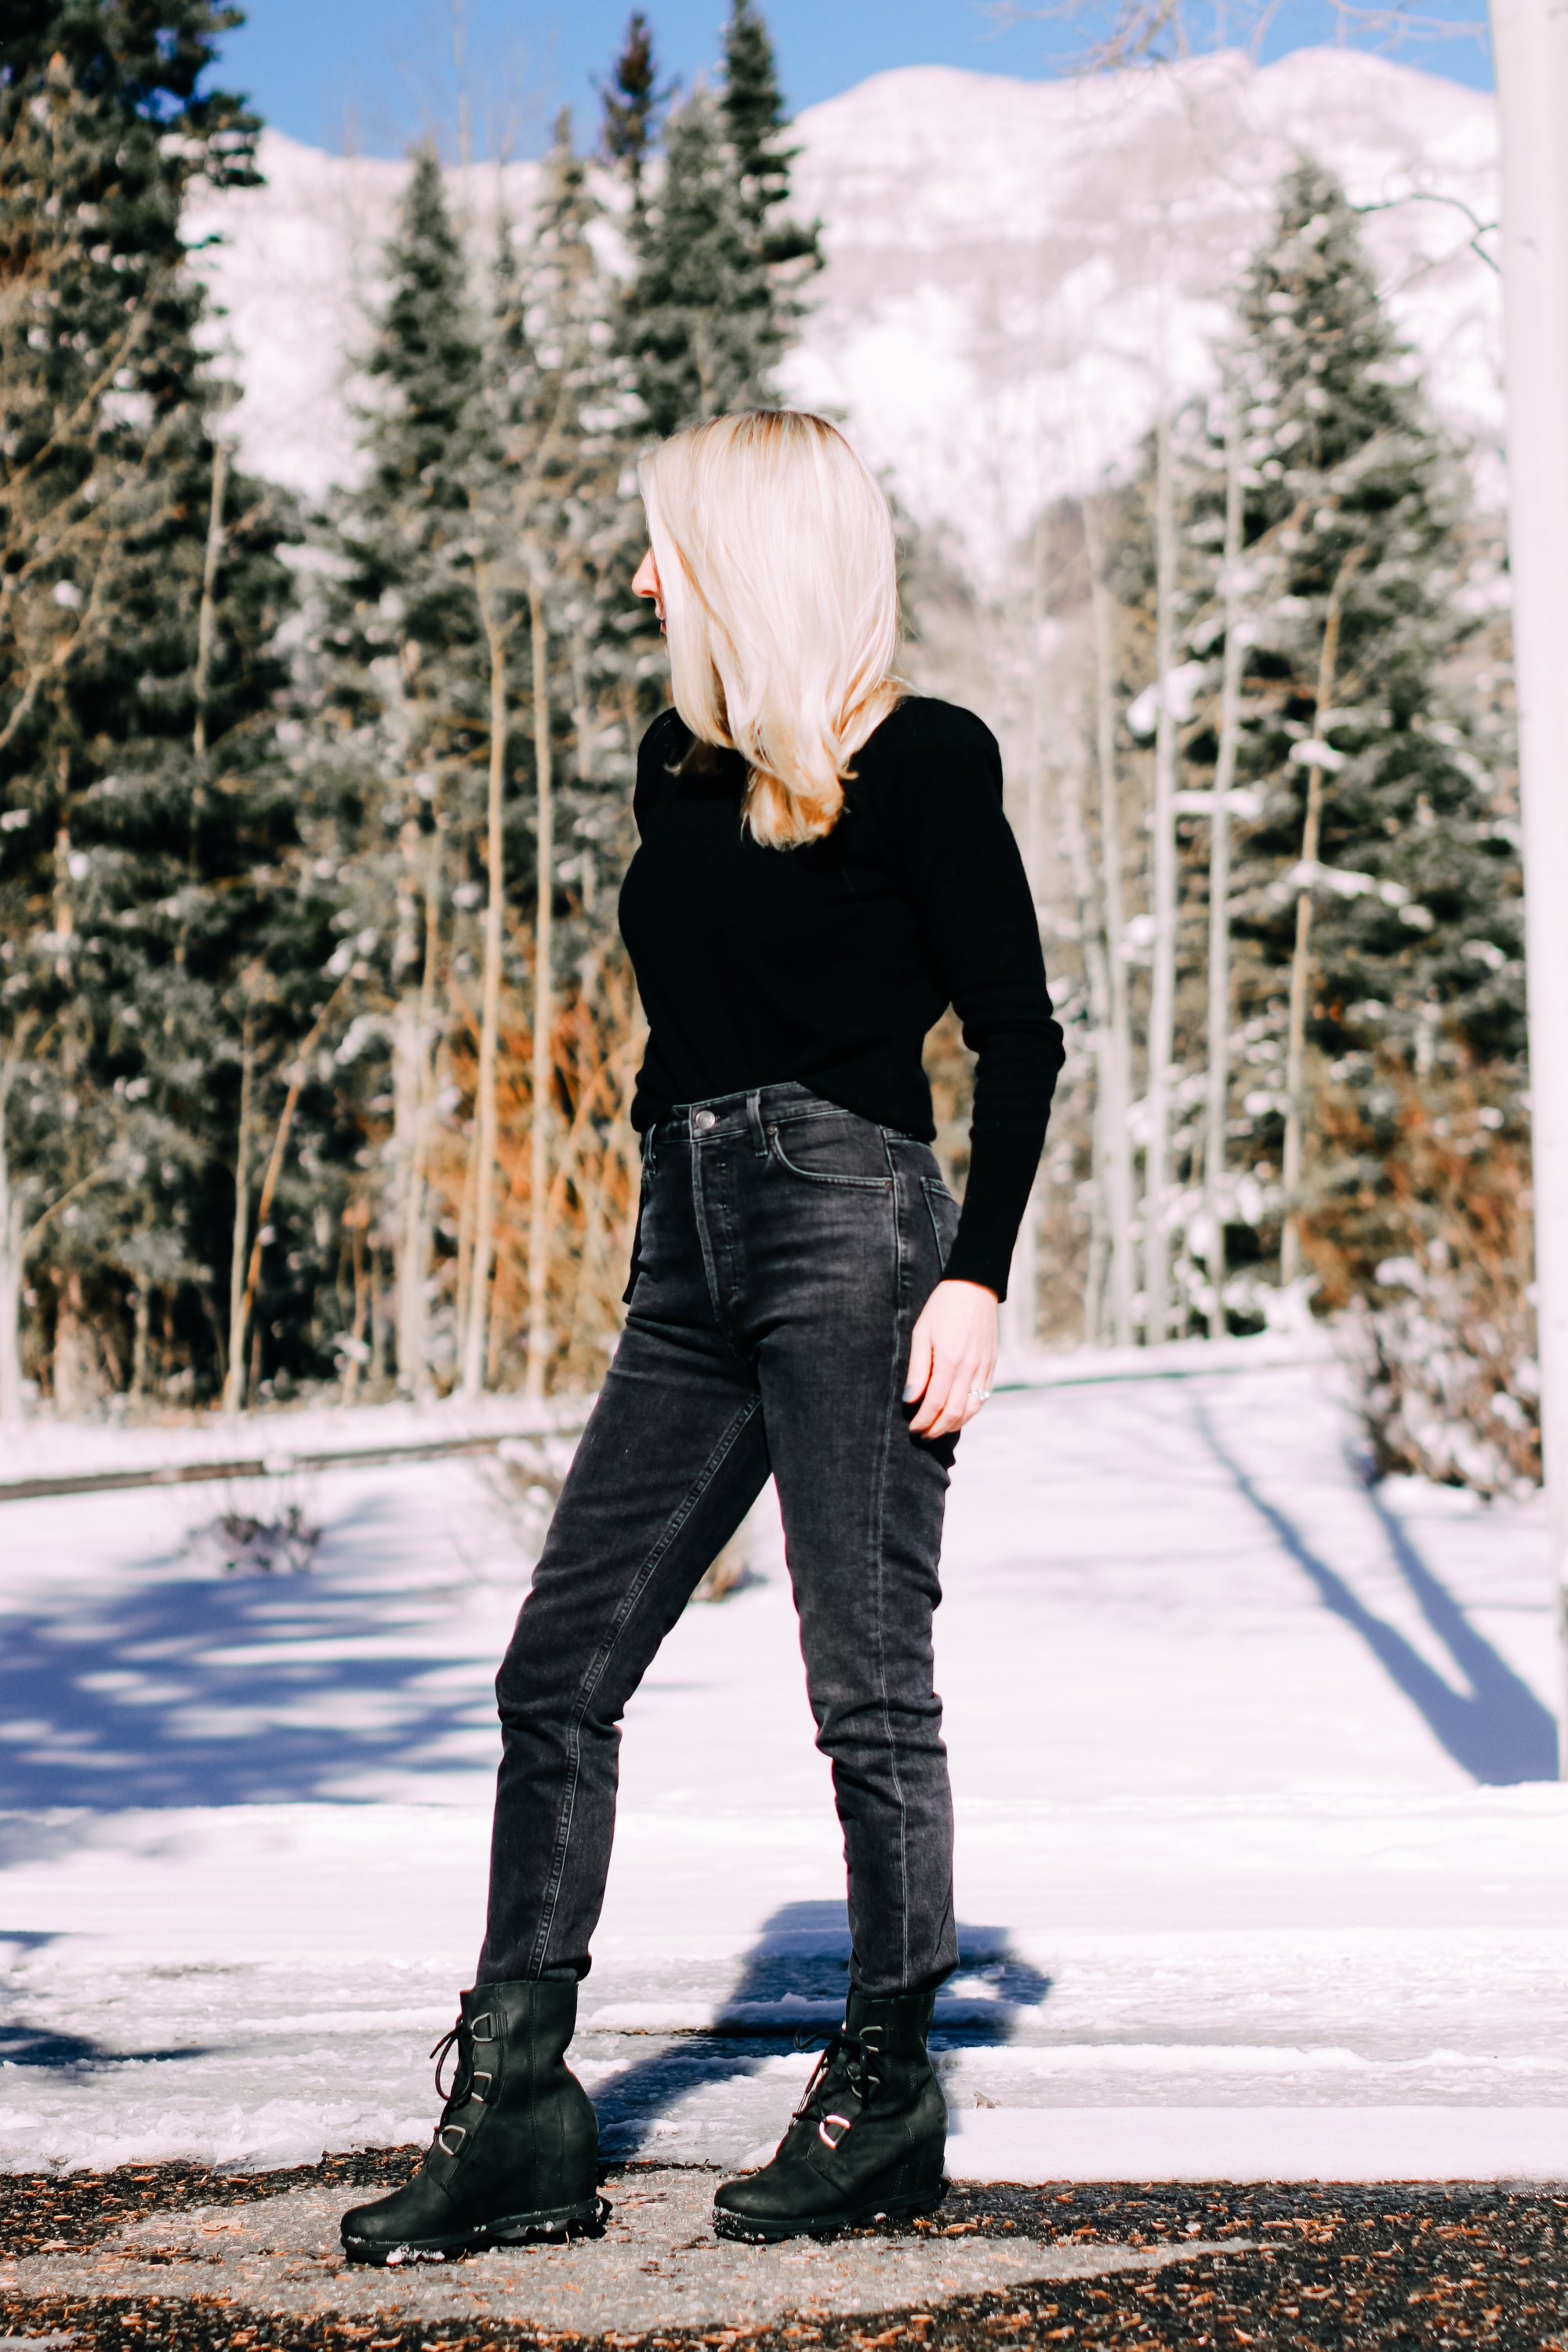 Thoughtful Gifts, Erin Busbee of Busbee Style wearing a black puff sleeve cashmere sweater by AQUA, gray wash Agolde jeans, black Sorel boots, and a diamond star necklace by Marc & Marcella from Bloomingdale's in Telluride, Colorado